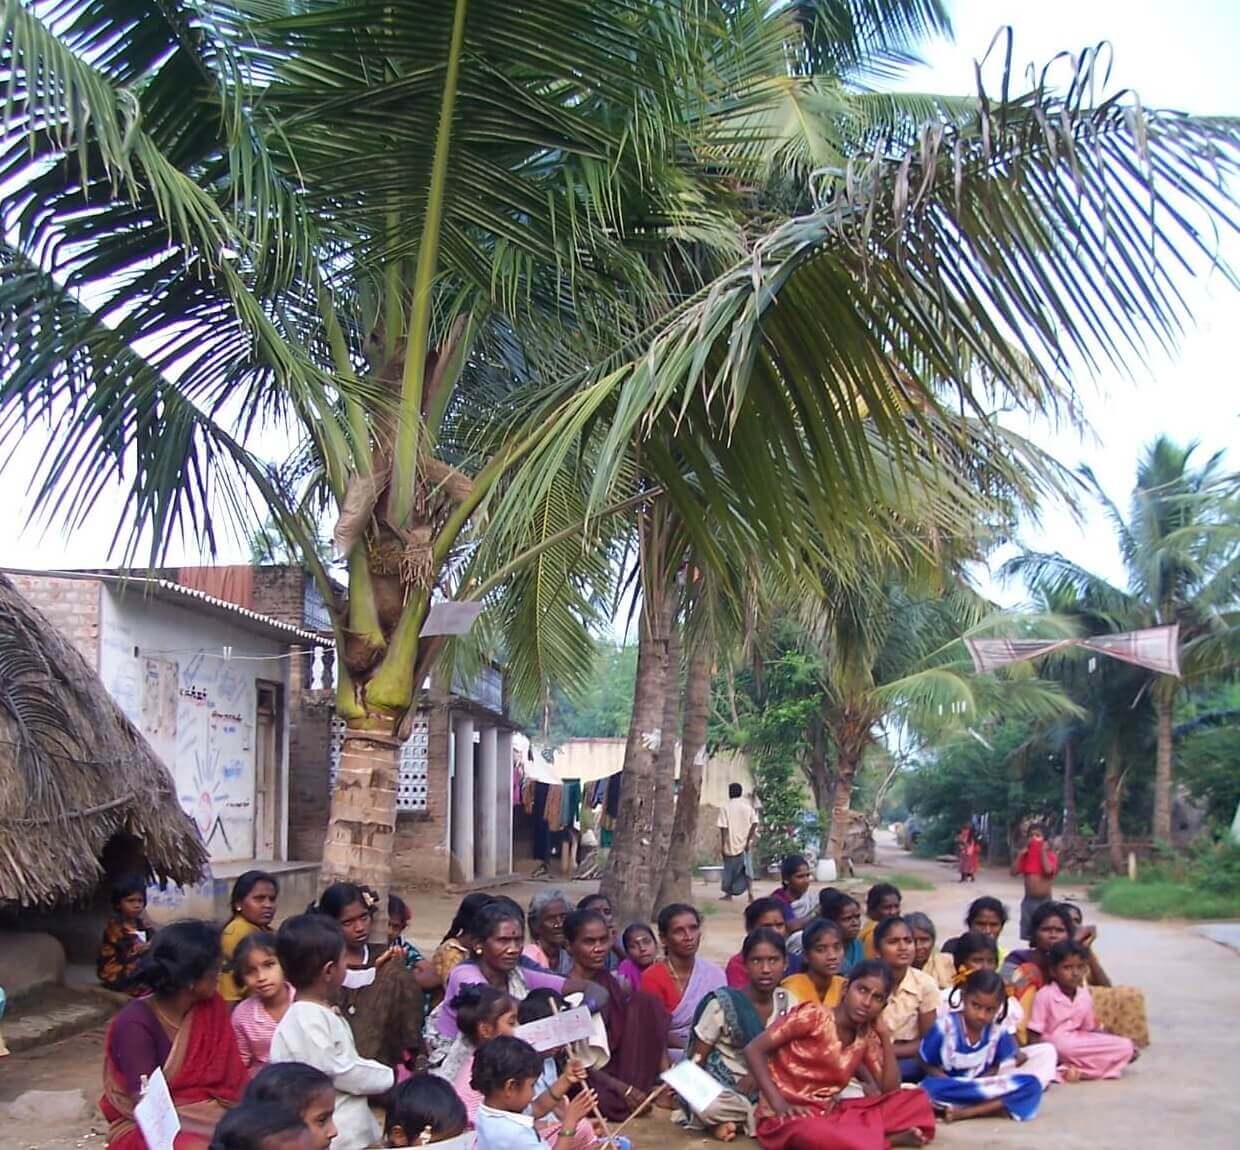 Environmental session under coconut trees